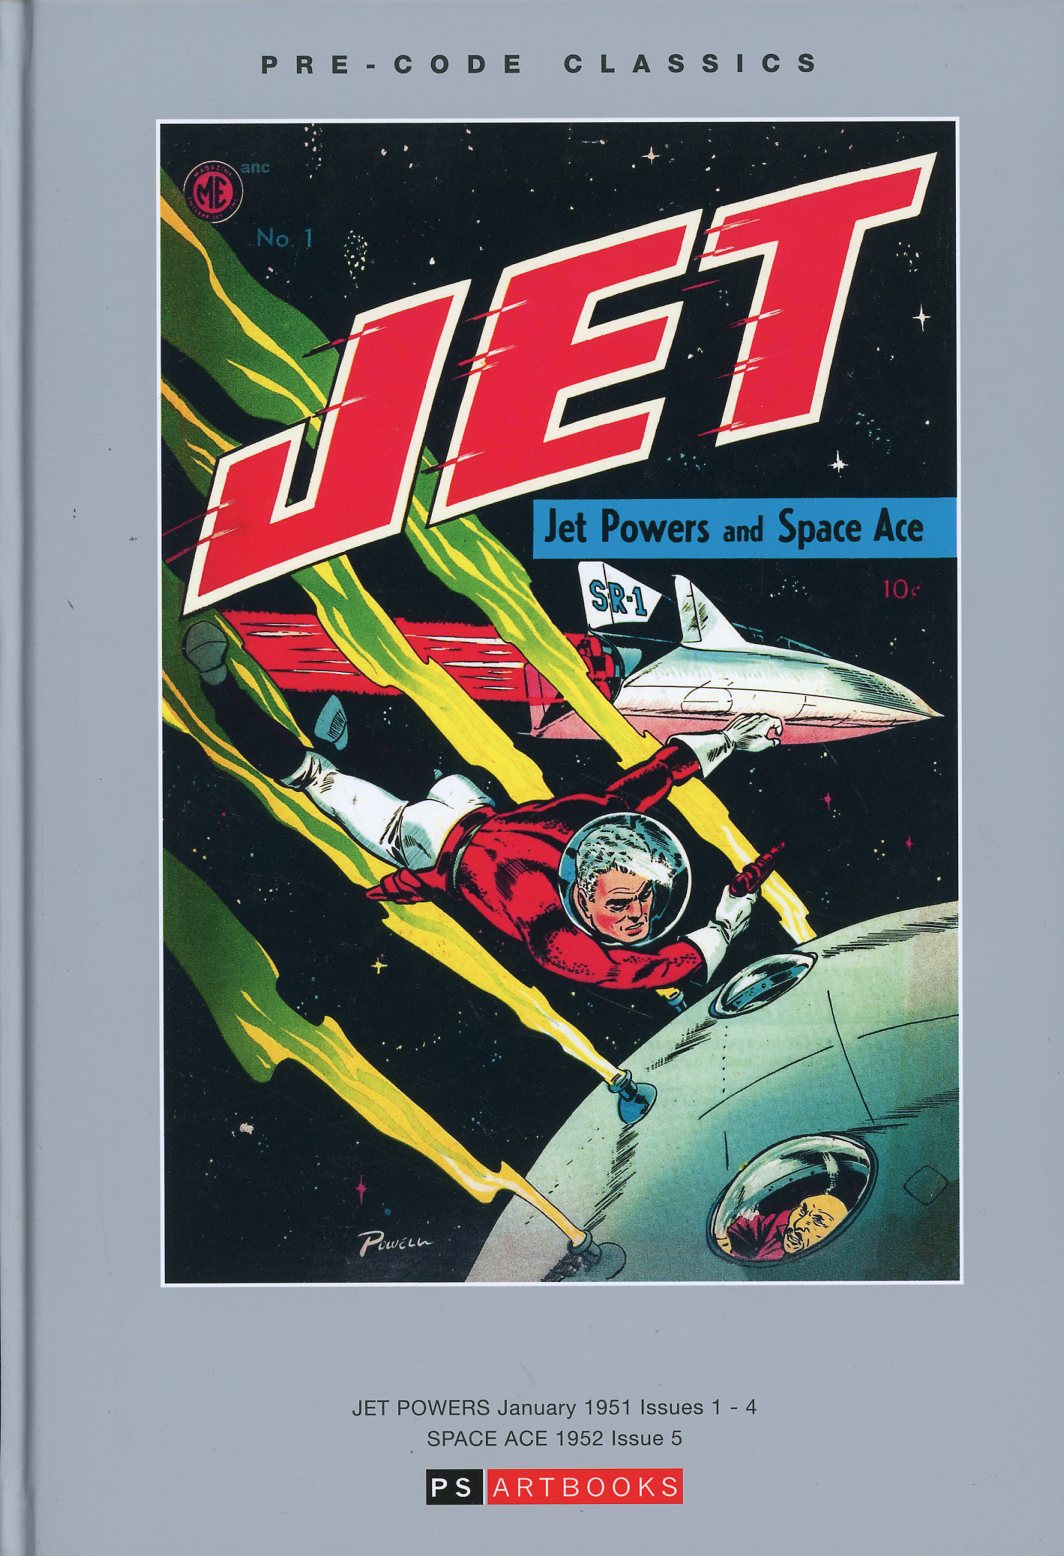 Pre-Code Classics Jet Powers And Space Ace Vol 1 HC